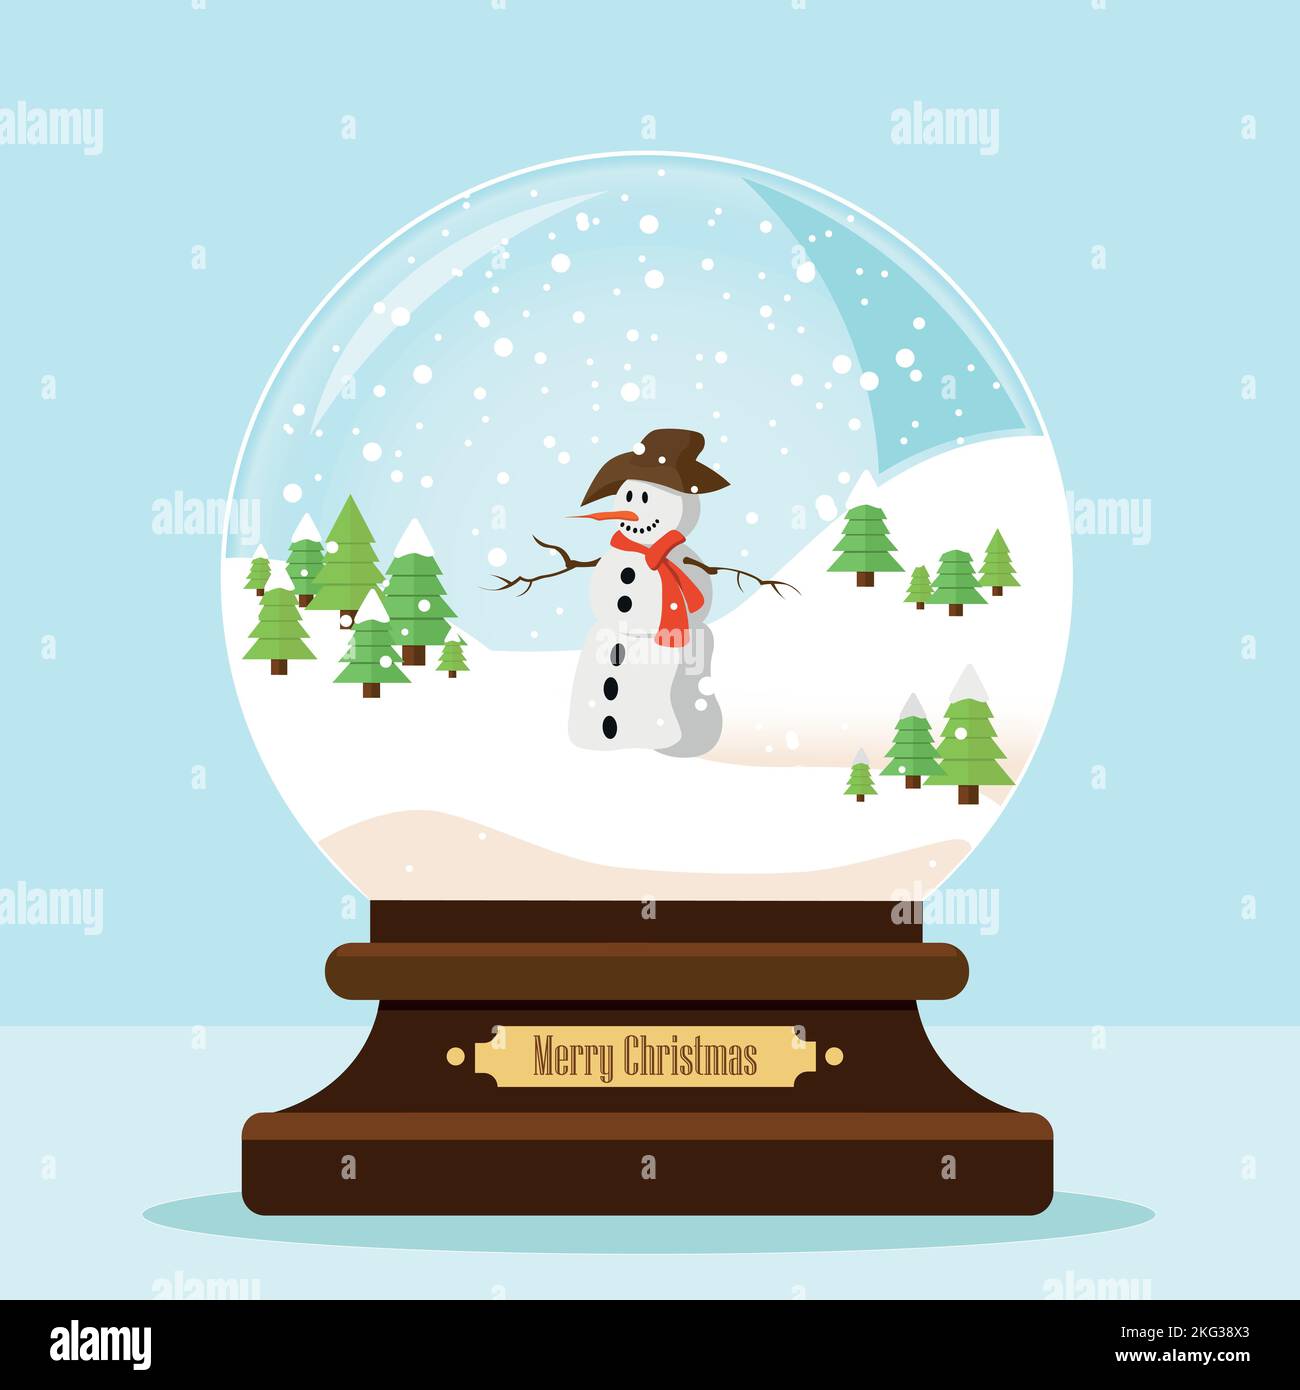 snowman among snowy hills and mountain pines inside a crystal ball - vector illustration - christmas holidays concept Stock Vector